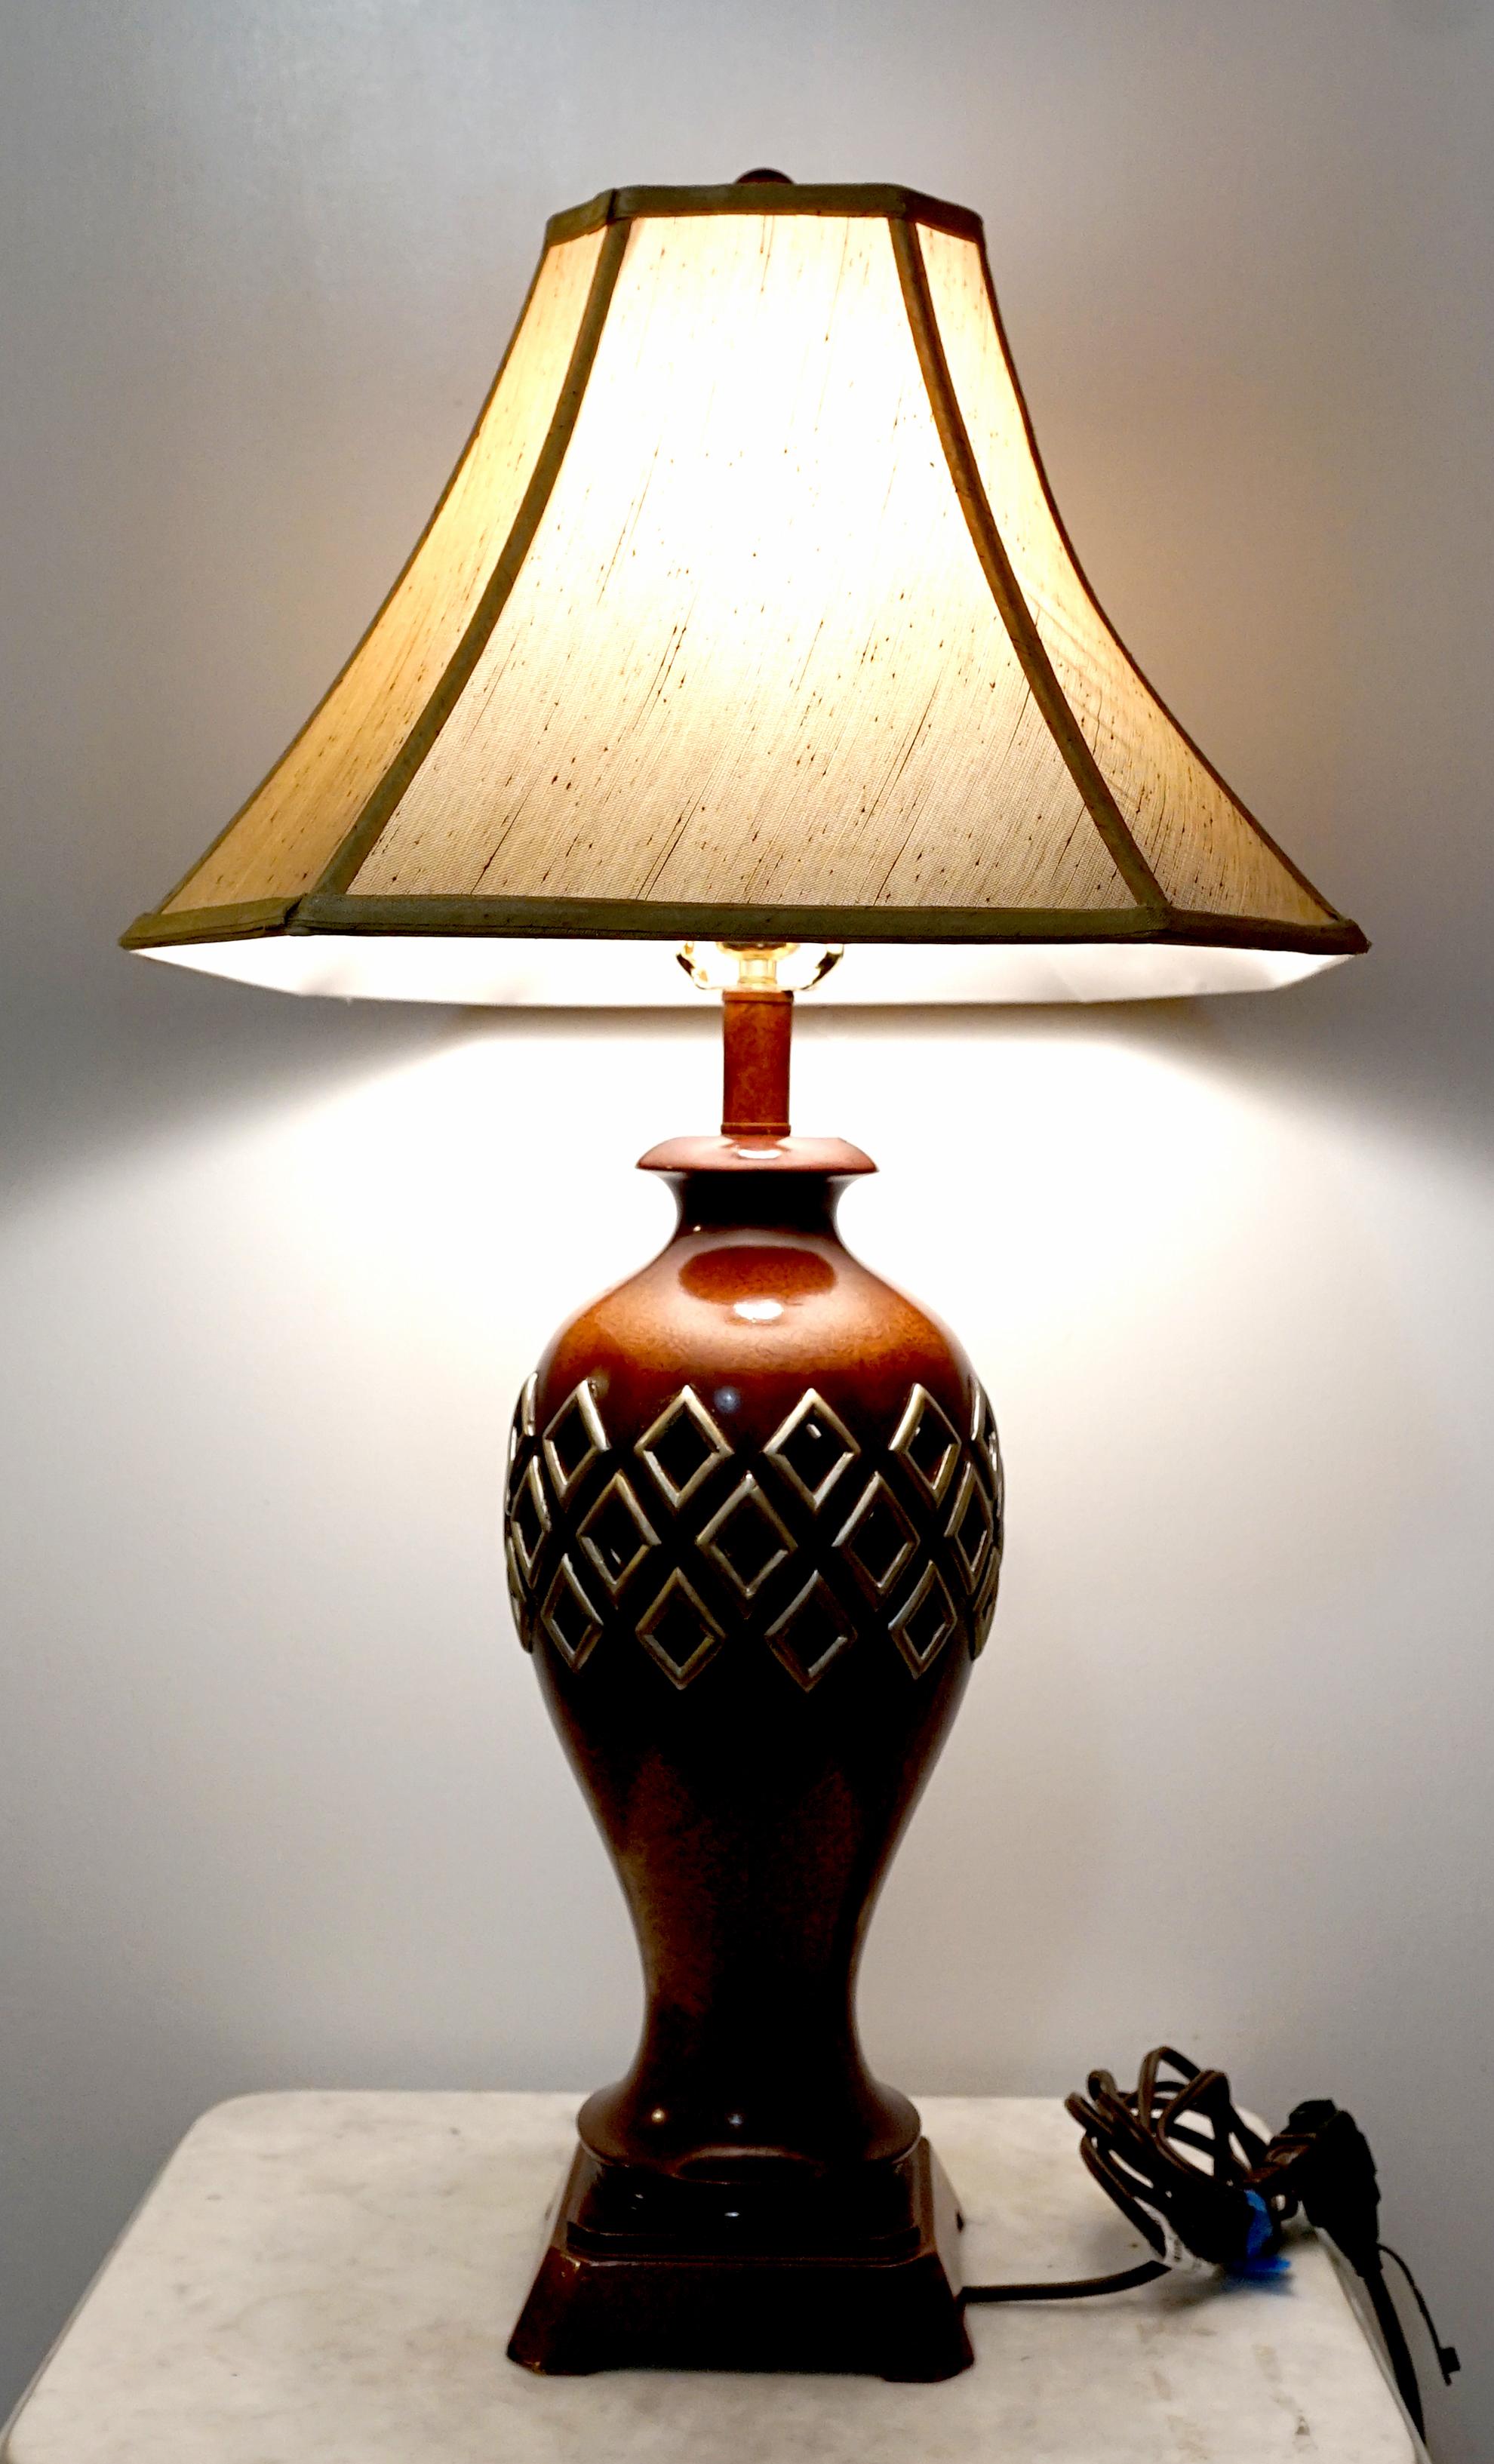 Regency Style Burled Baluster Diamond Cut-Out Wood Table Lamp In Good Condition For Sale In Lomita, CA